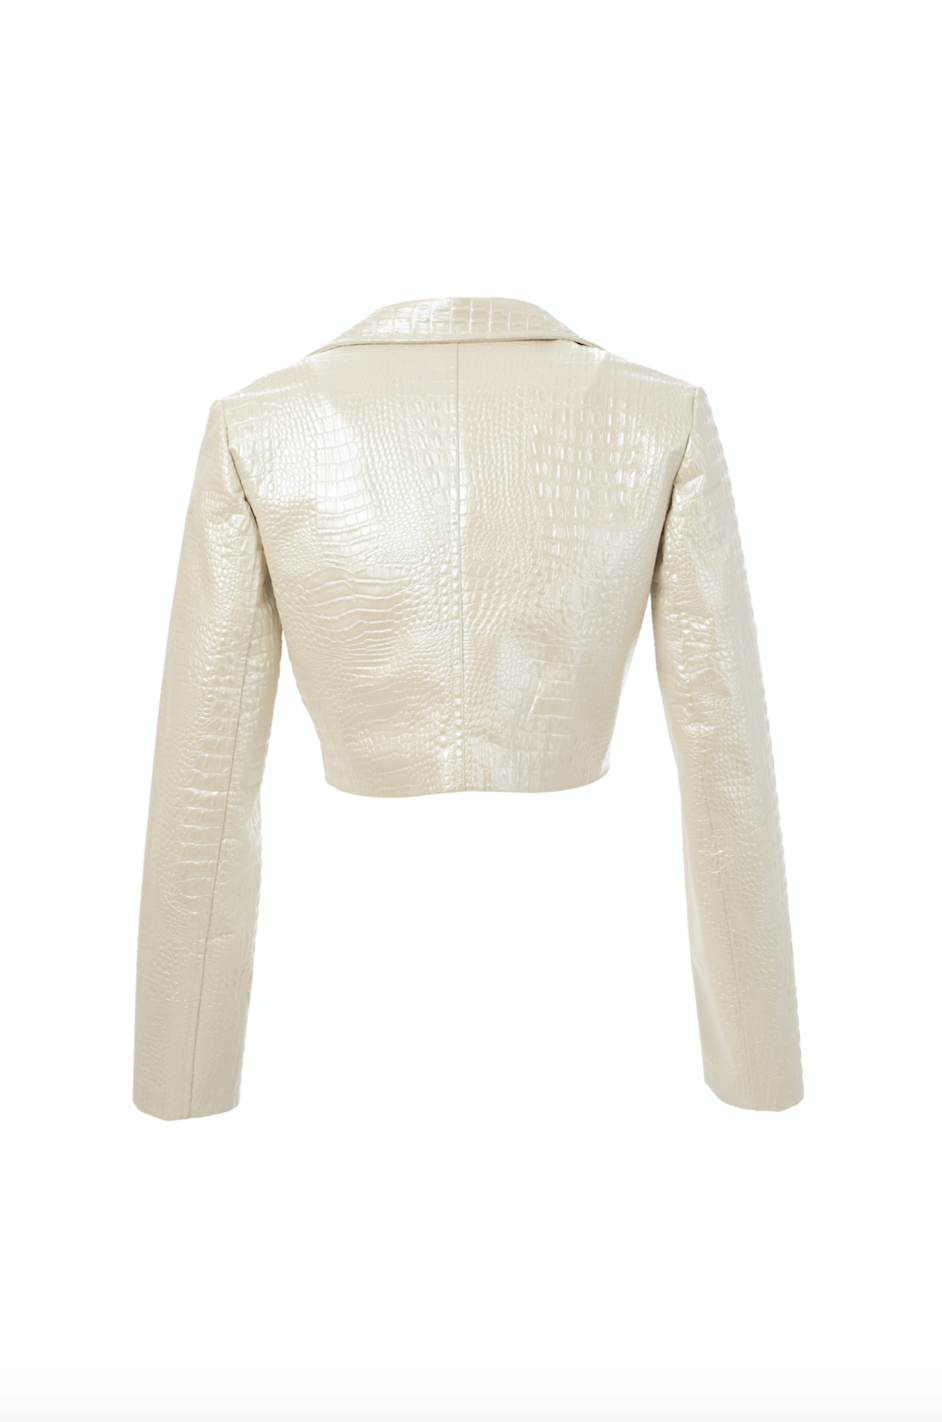 Pearl faux crocodile leather blazer with front seams. 